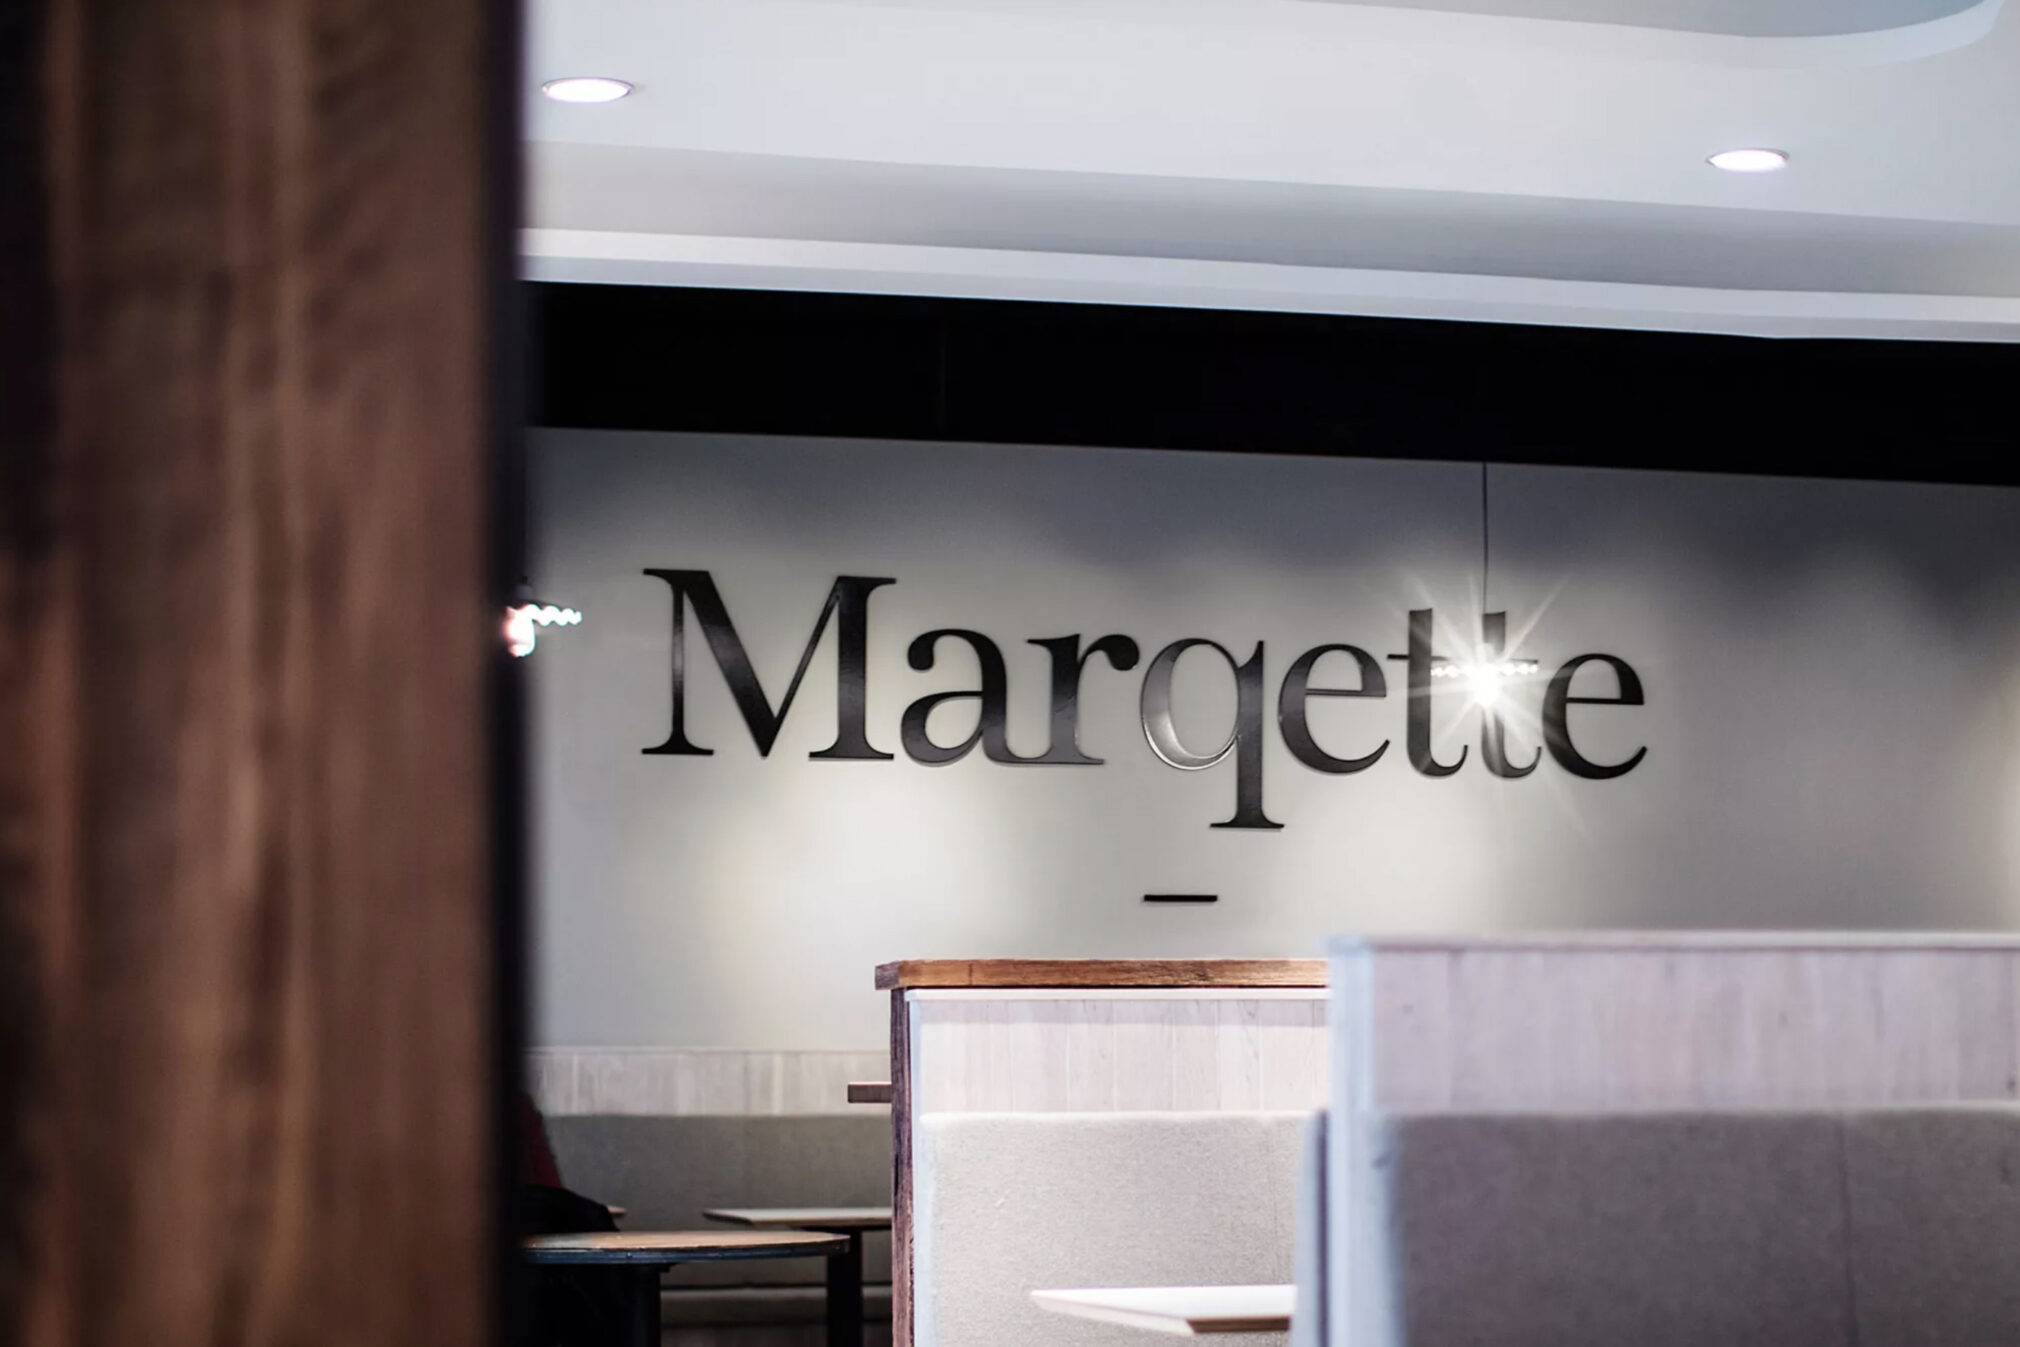 Marqette wall sign seated area